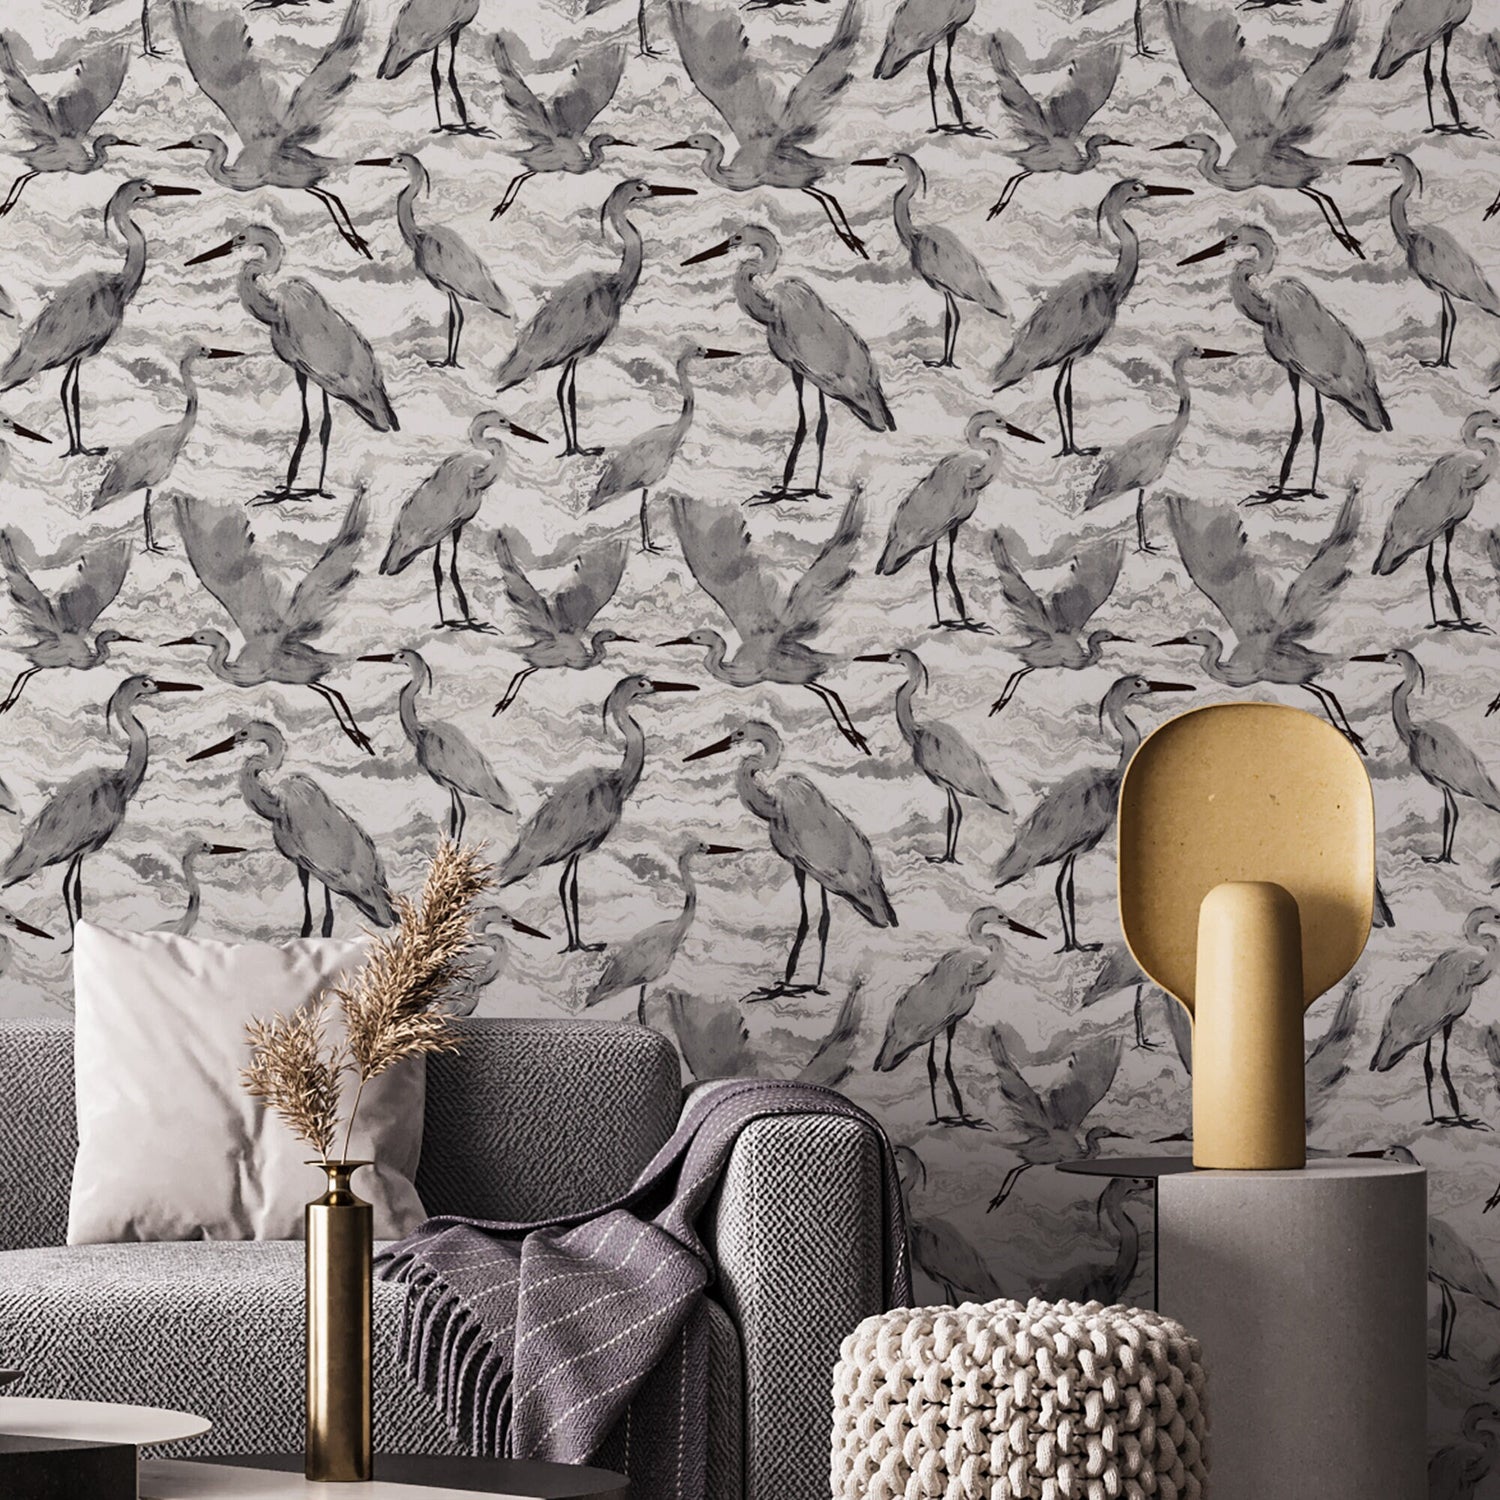 Soft vintage birds chinoiserie wallpaper, cranes wall mural, peel and stick  and traditional wallcovering